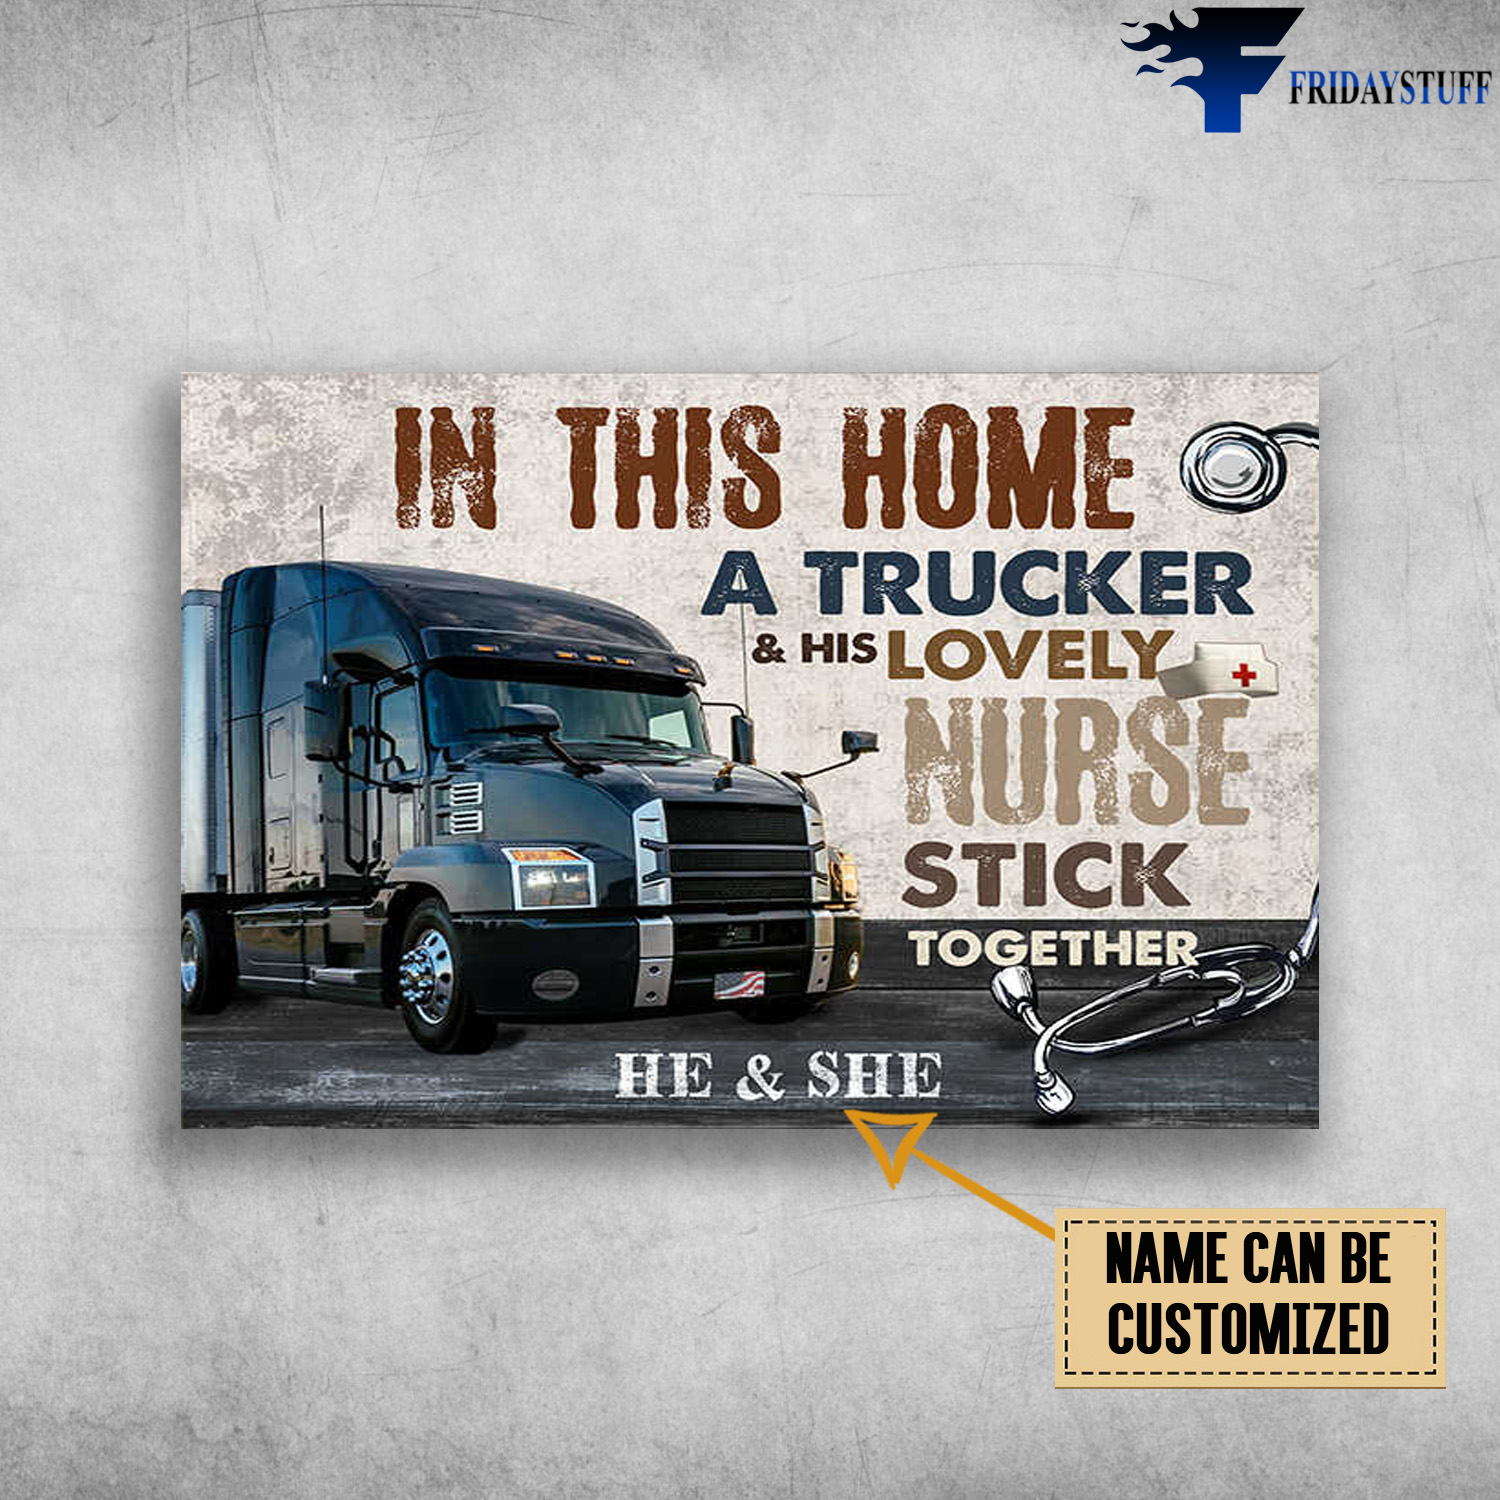 The Truck - In This Home A Trucker And His Lovely Nurse Stick Together